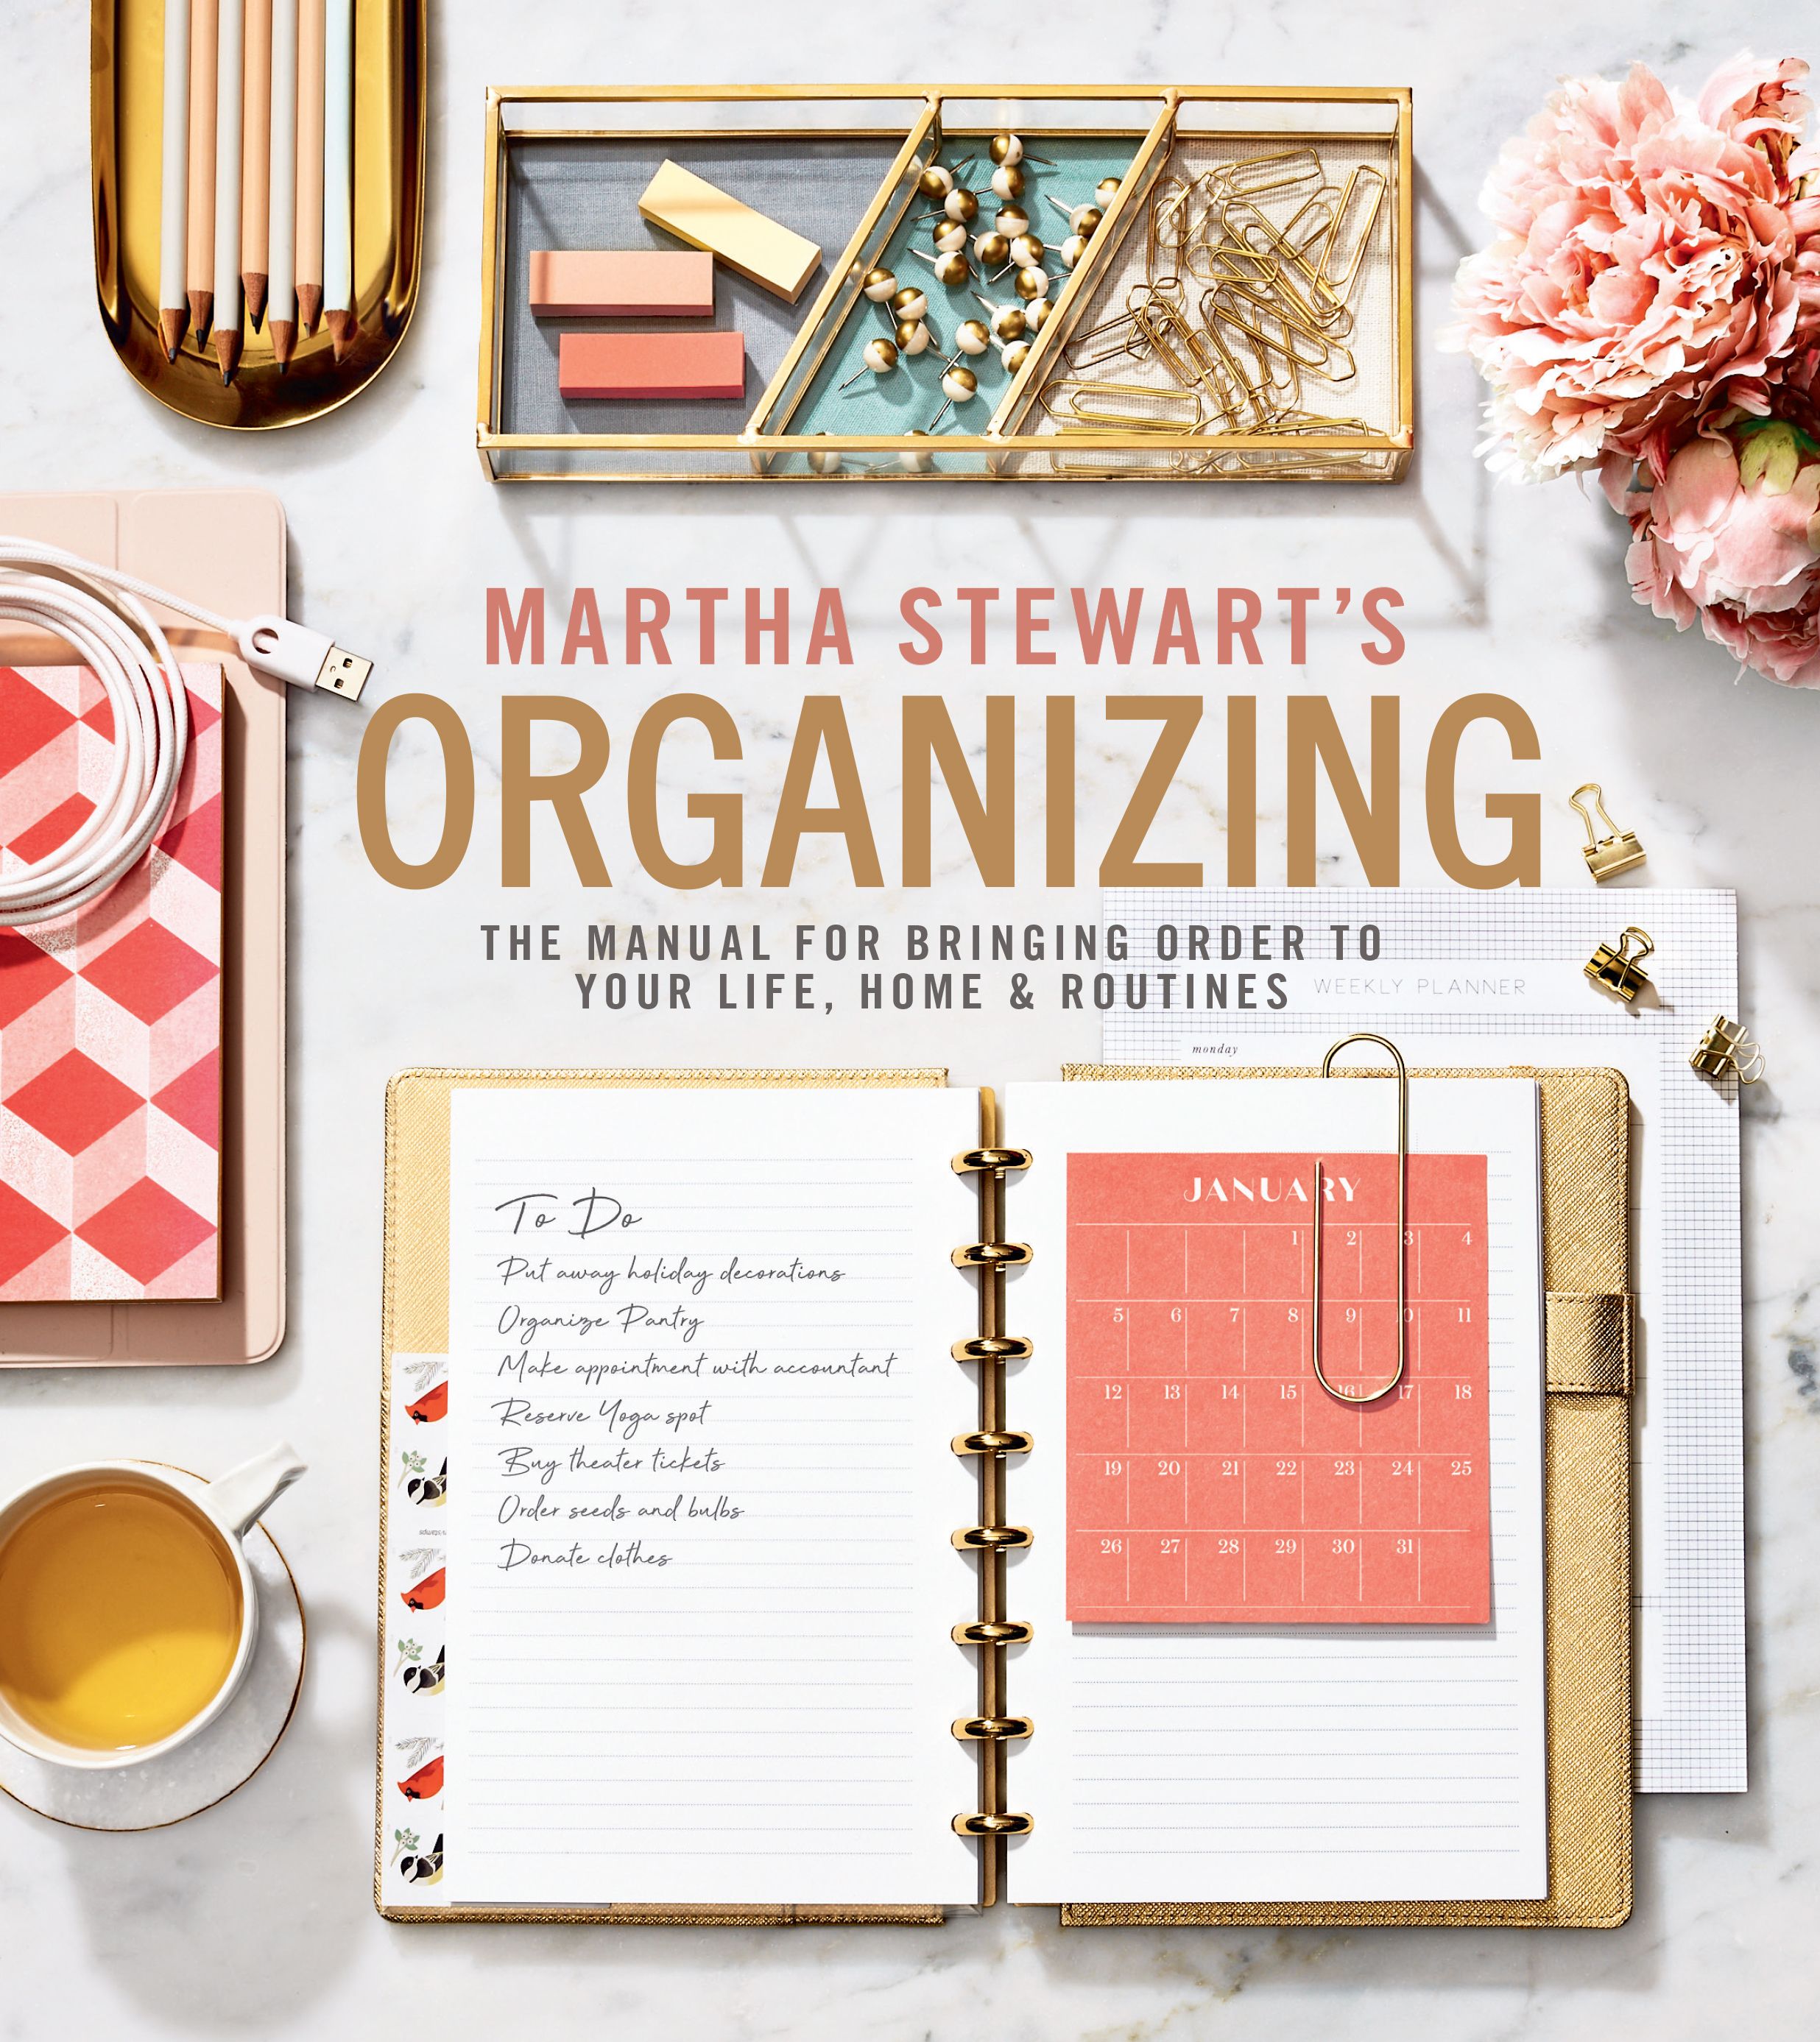 'Martha Stewart's Organizing: The Manual for Bringing Order to Your Life, Home & Routines'